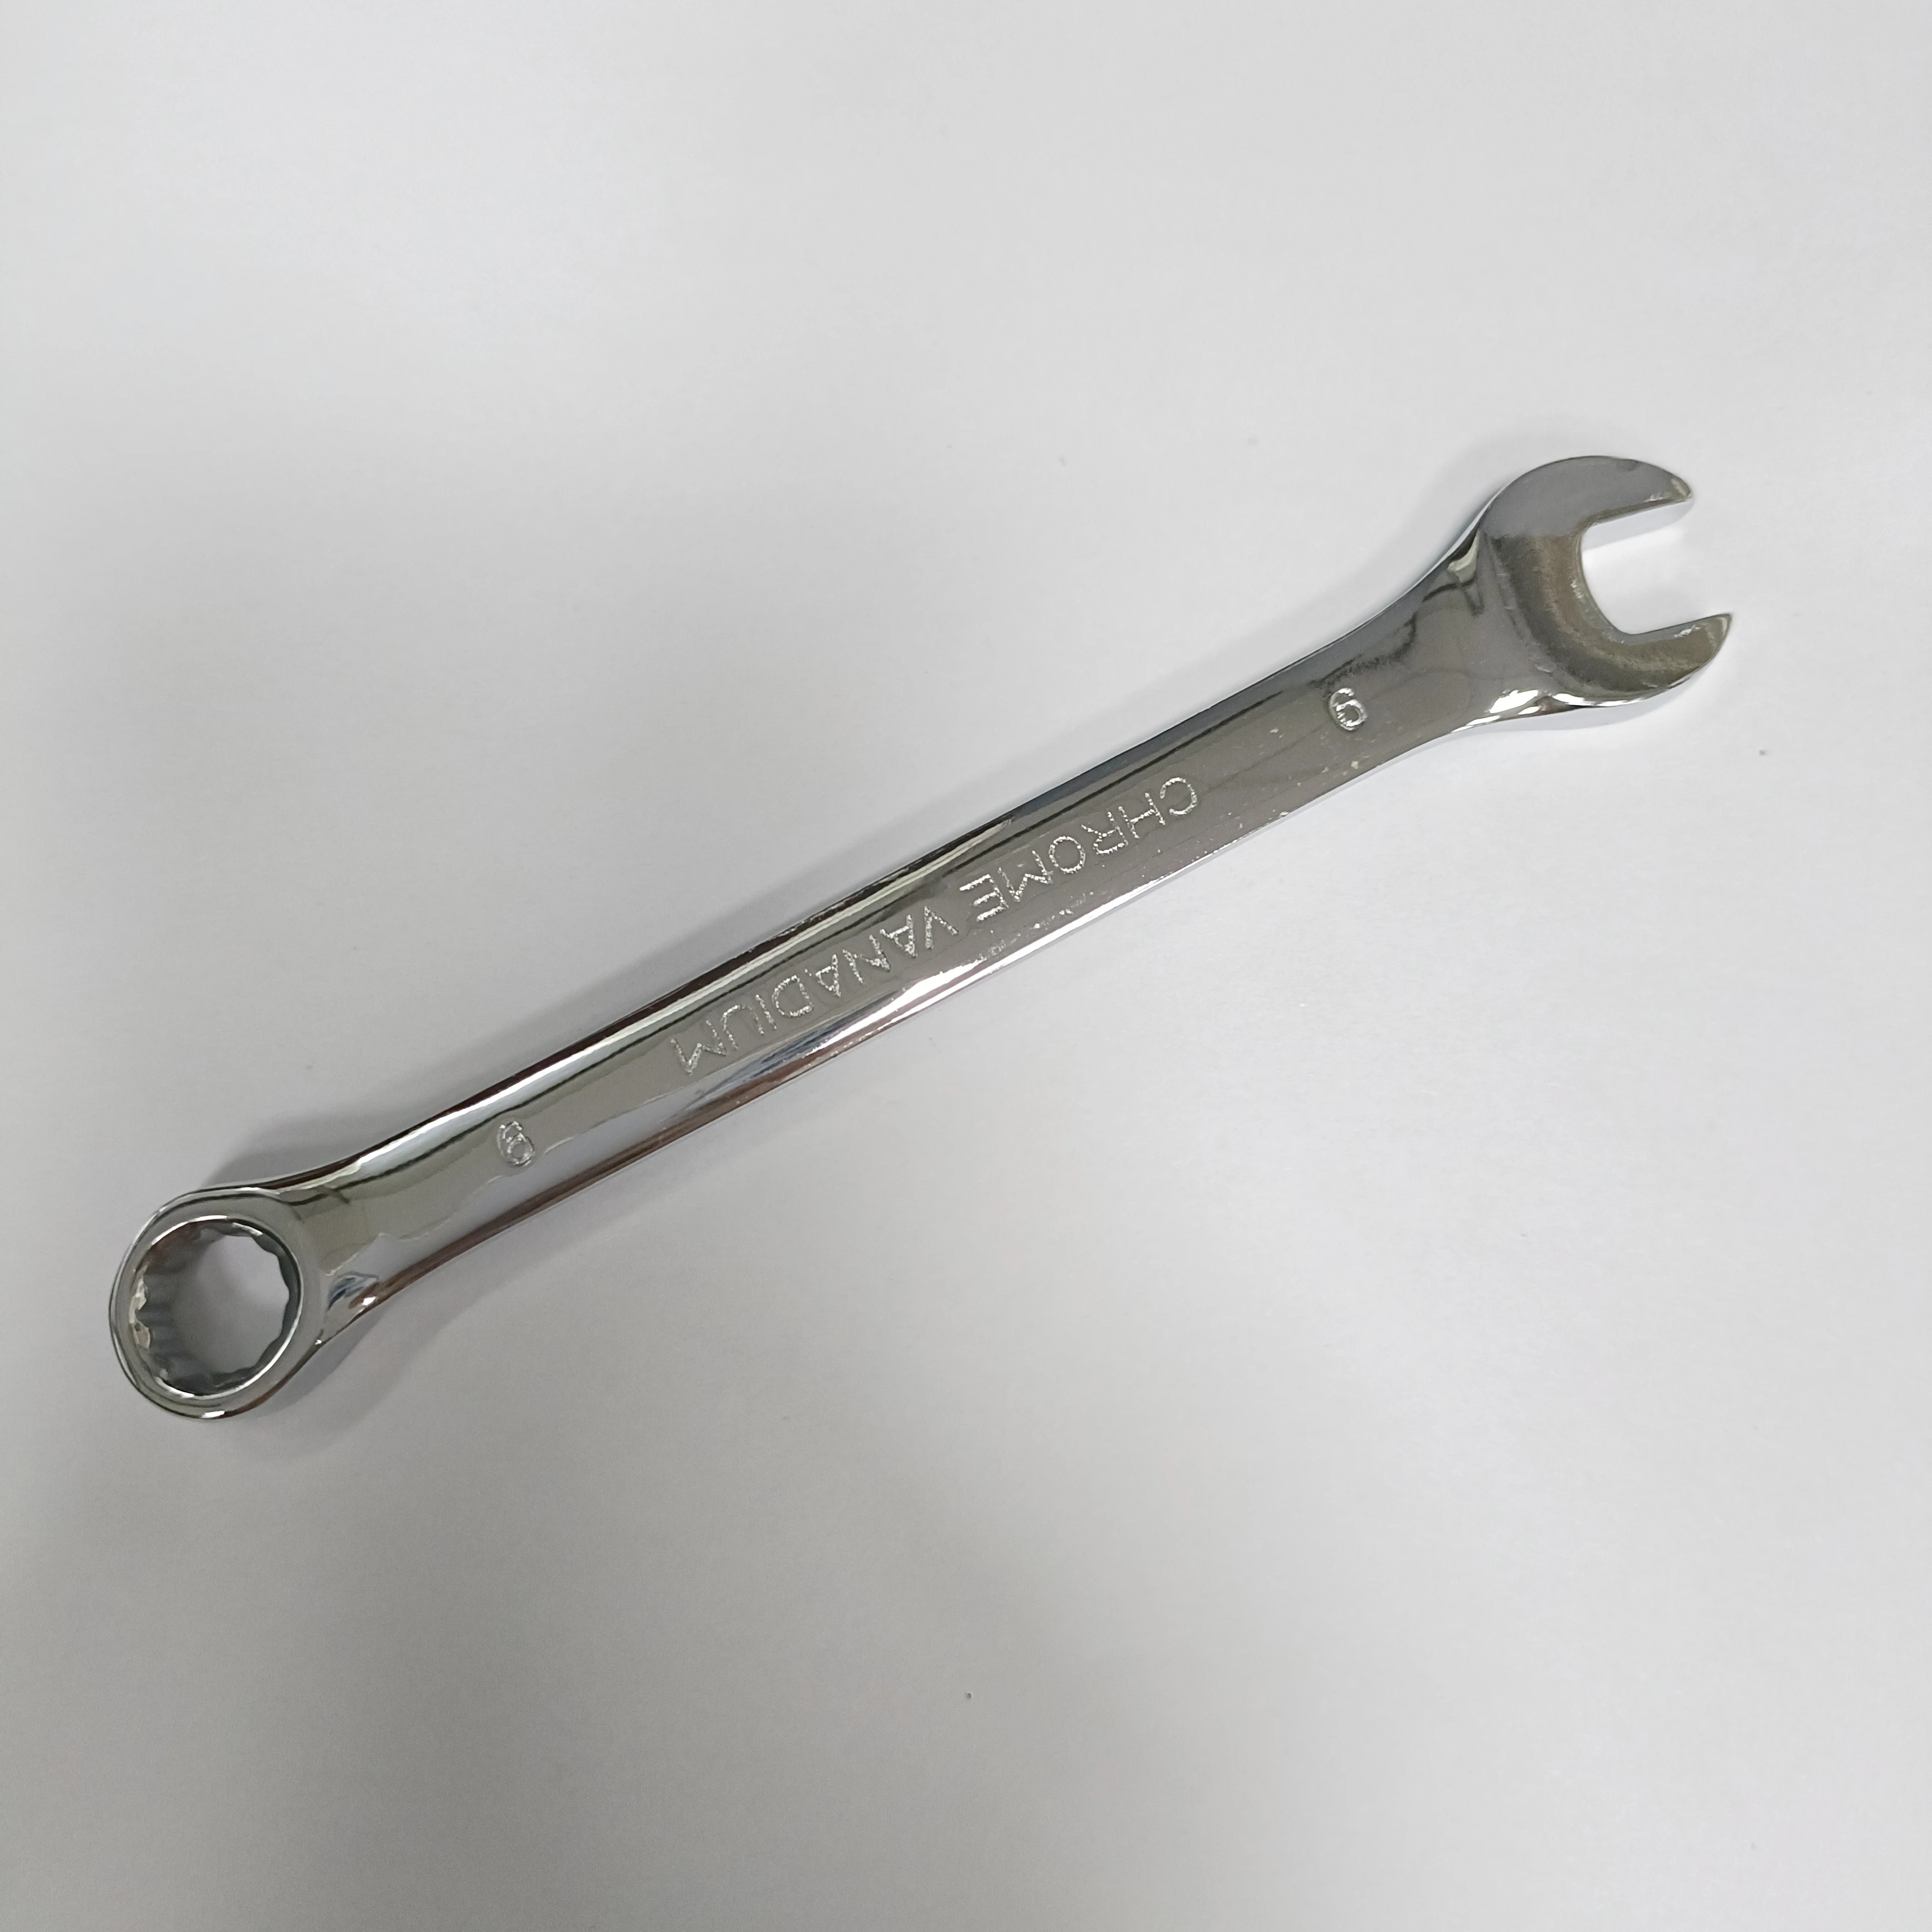 13mm COMBINATION SPANNER/WRENCH FULLY POLISHED CHROME VANADIUM-CRV x 2  SP114 